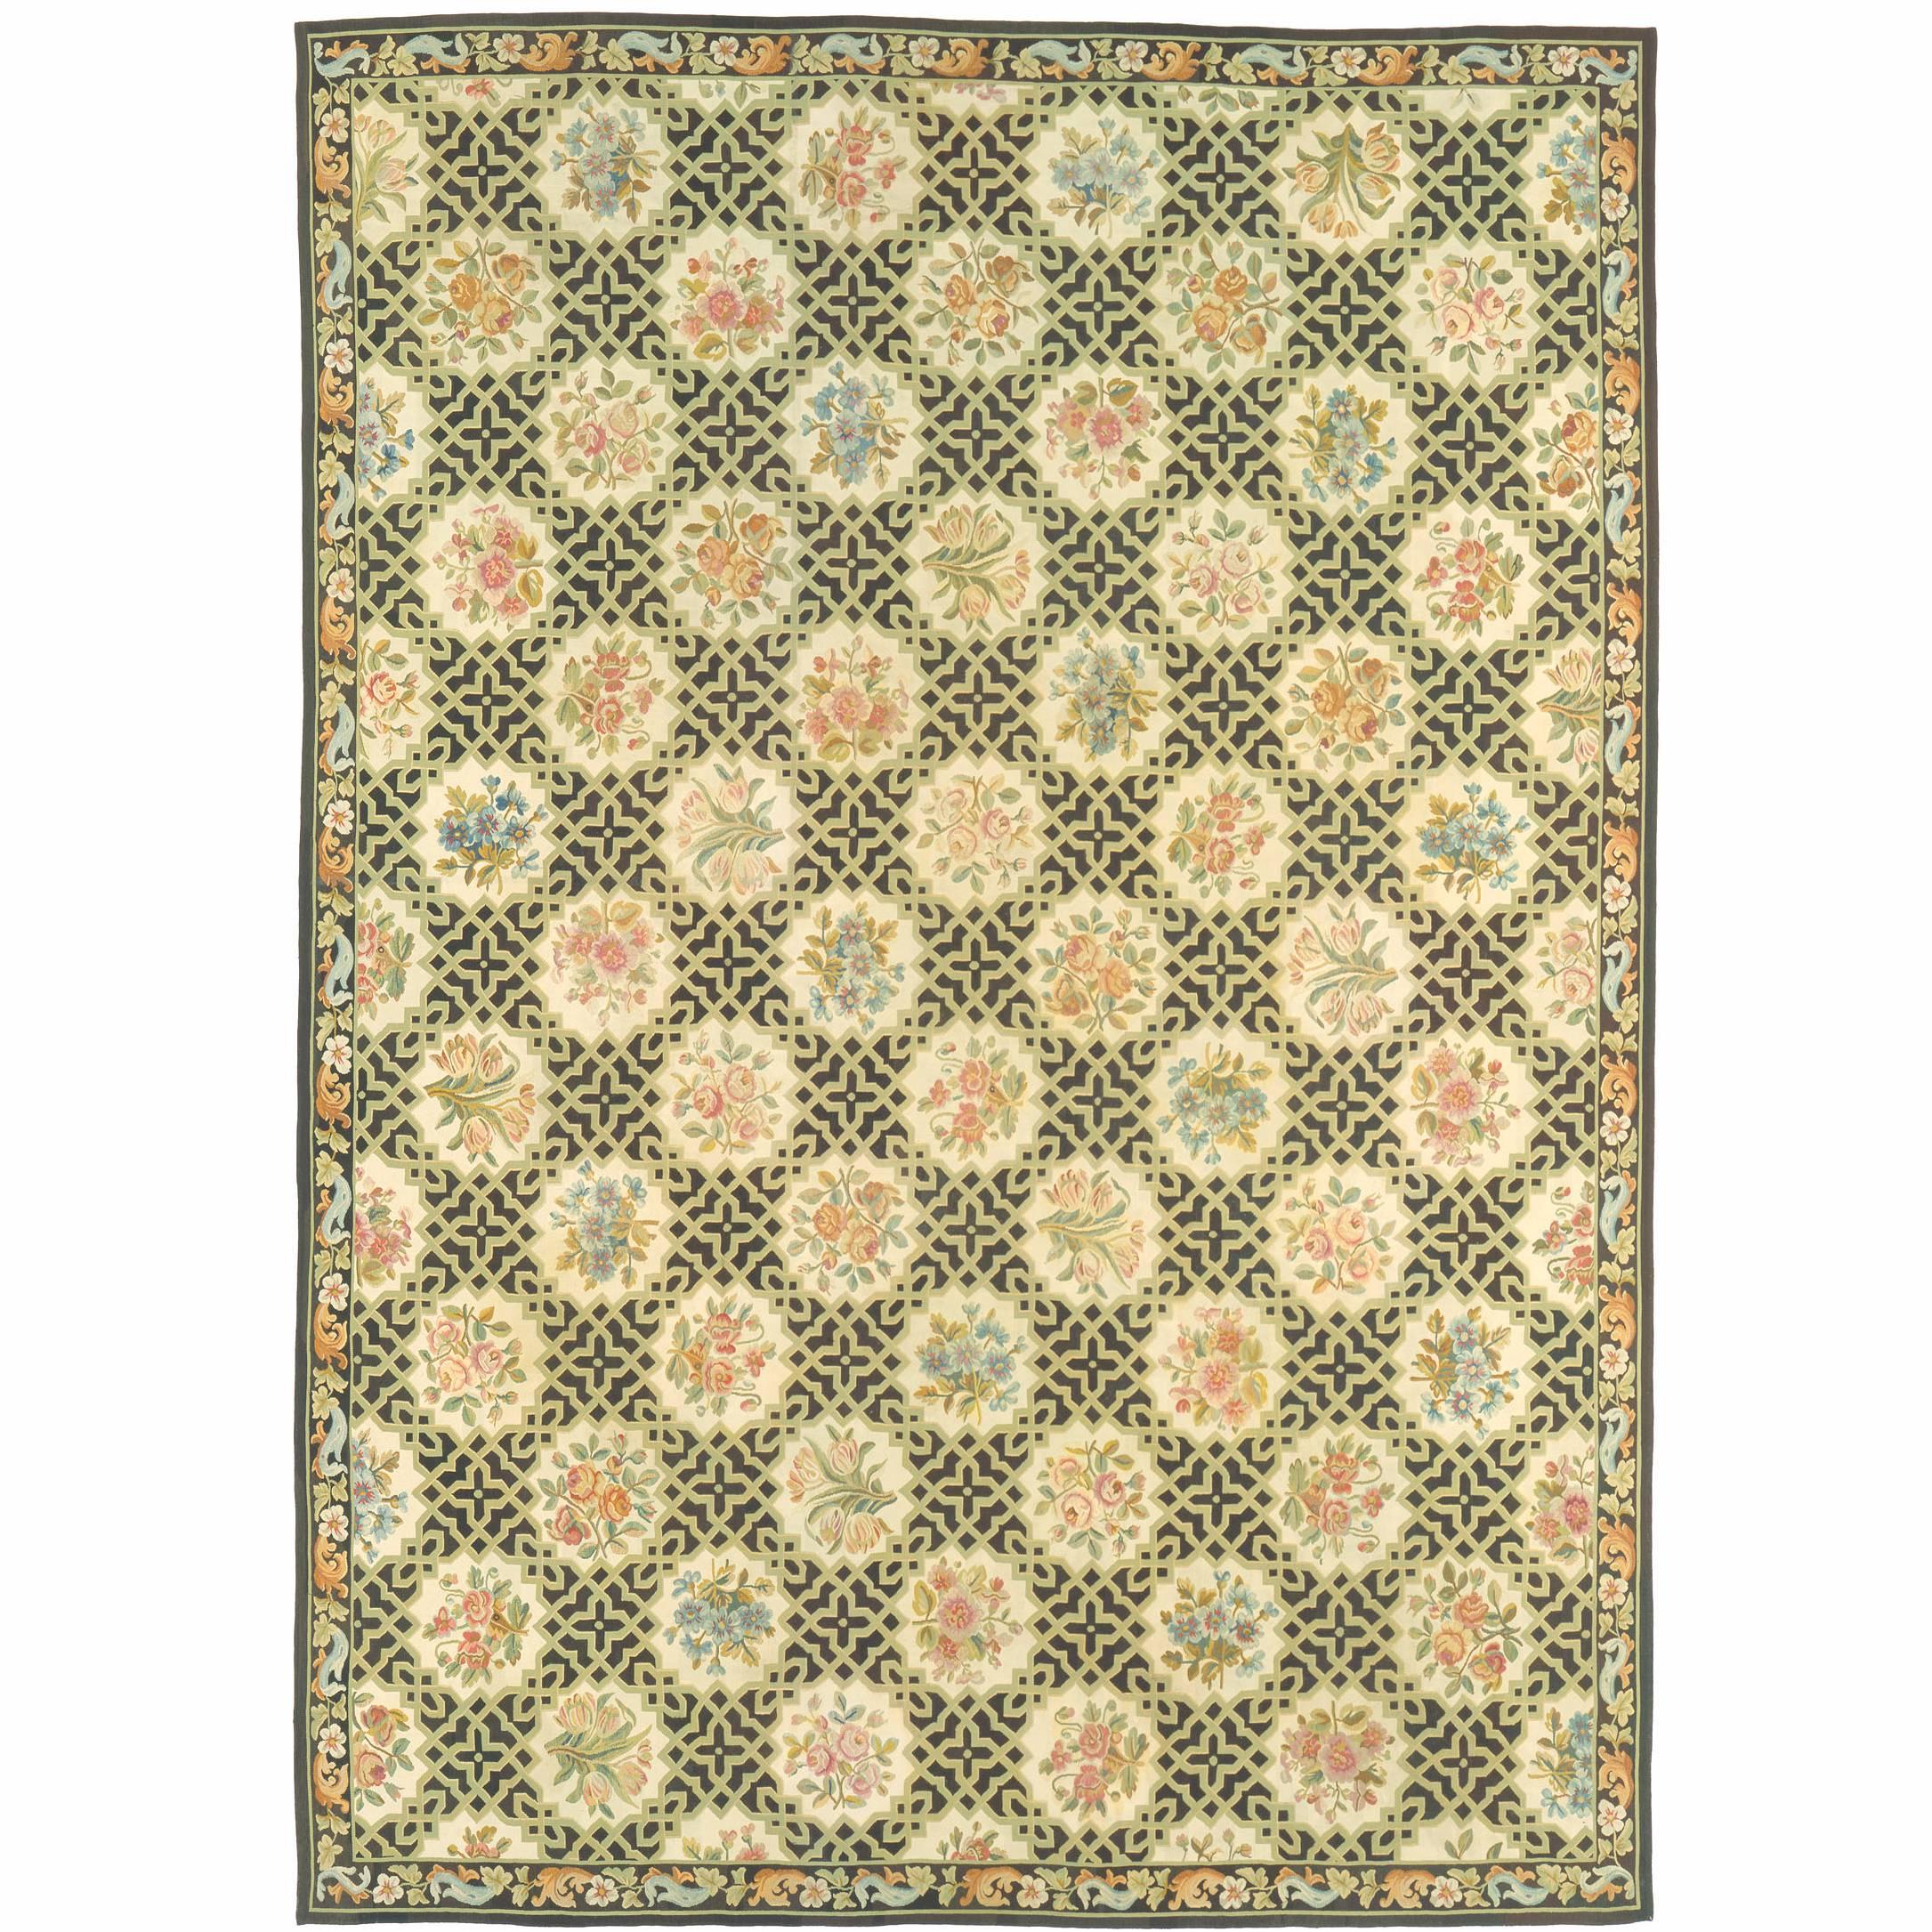 Early 20th Century Aubusson Carpet For Sale